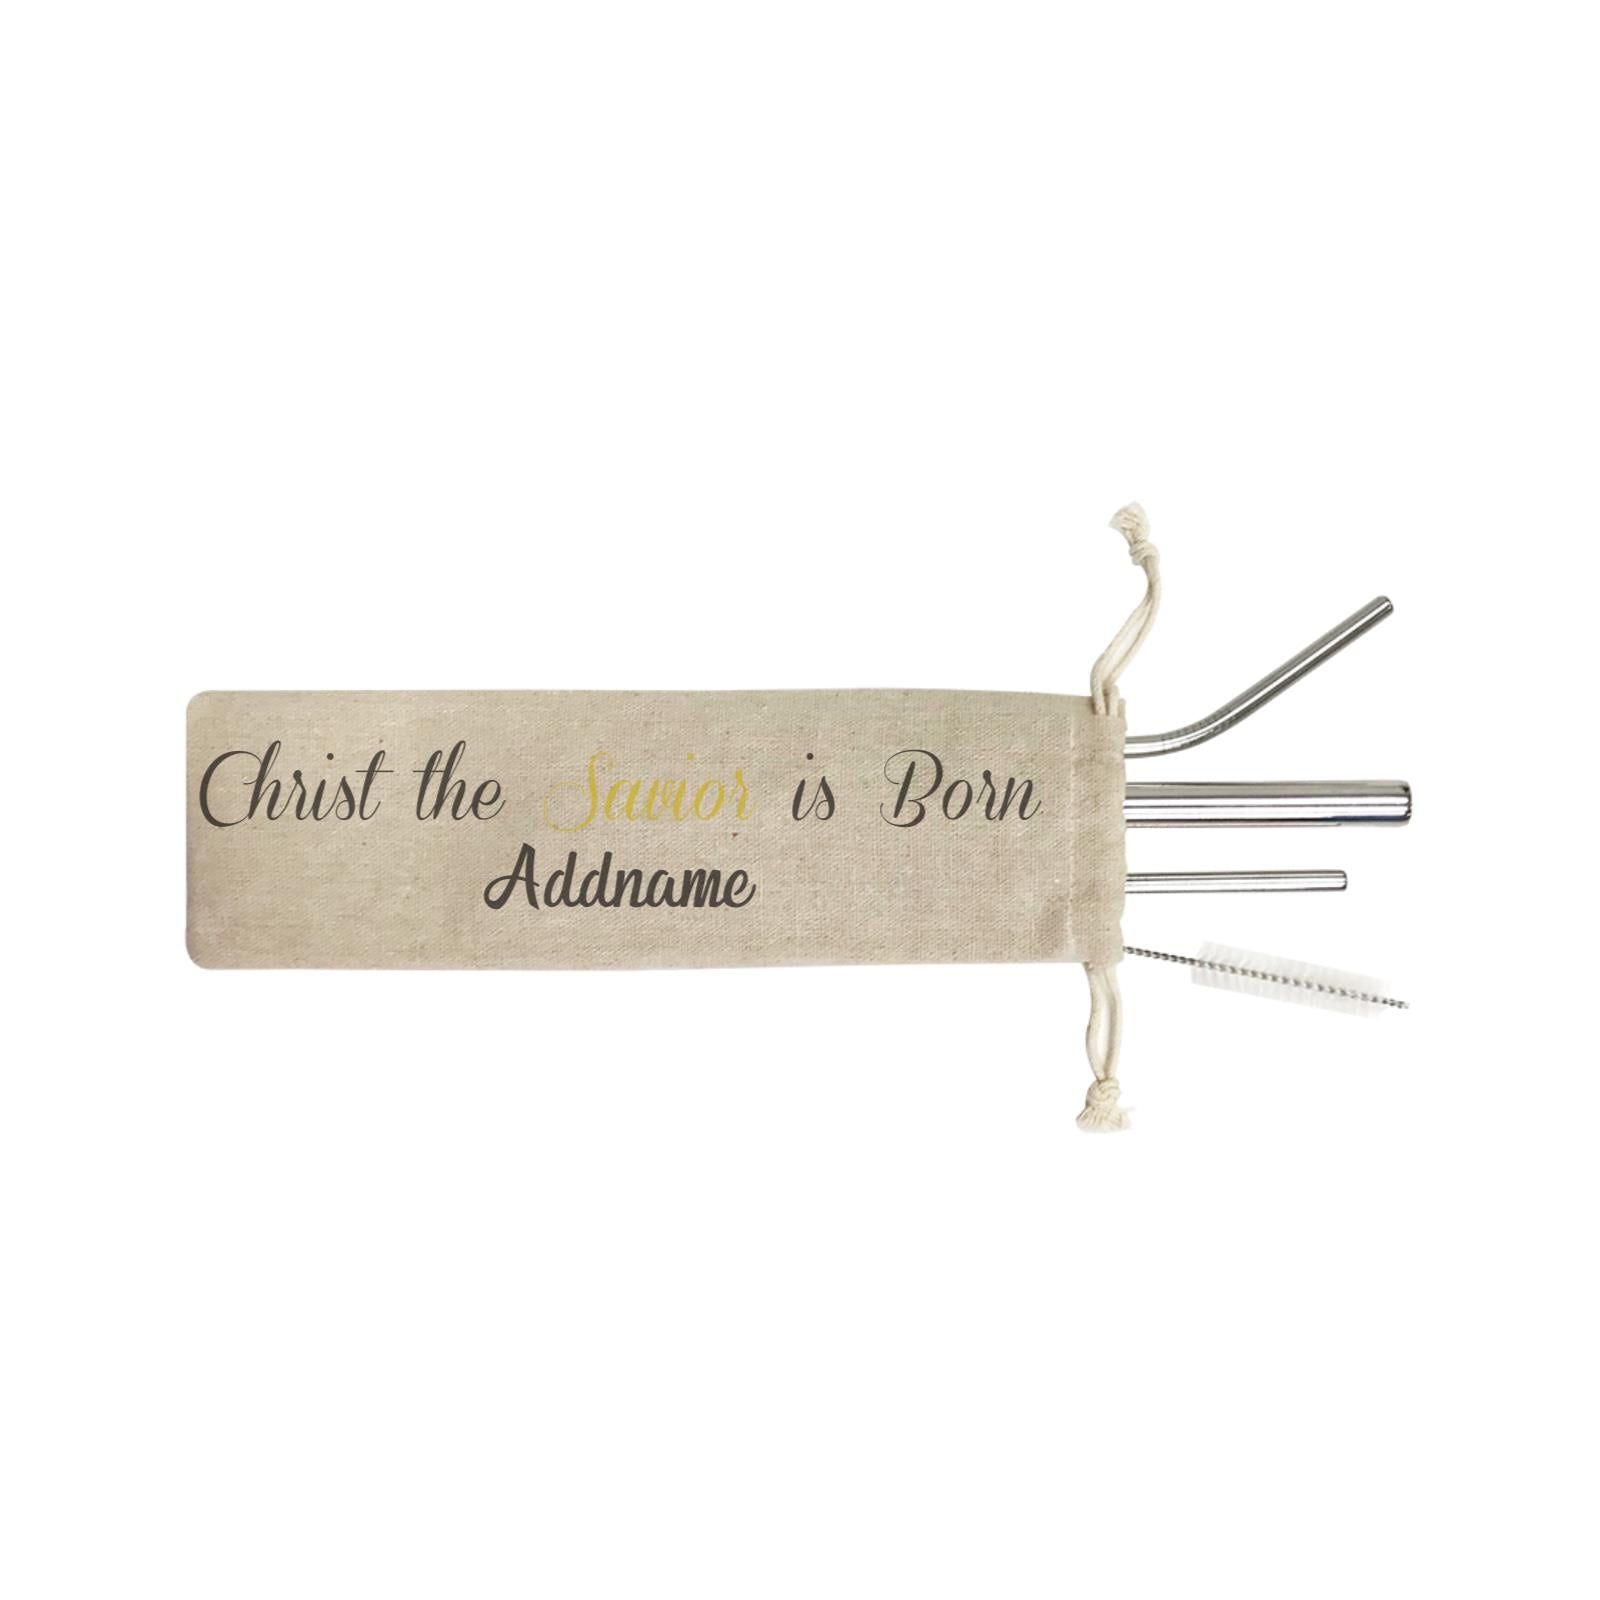 Xmas Christ the Savior is Born SB 4-in-1 Stainless Steel Straw Set In a Satchel